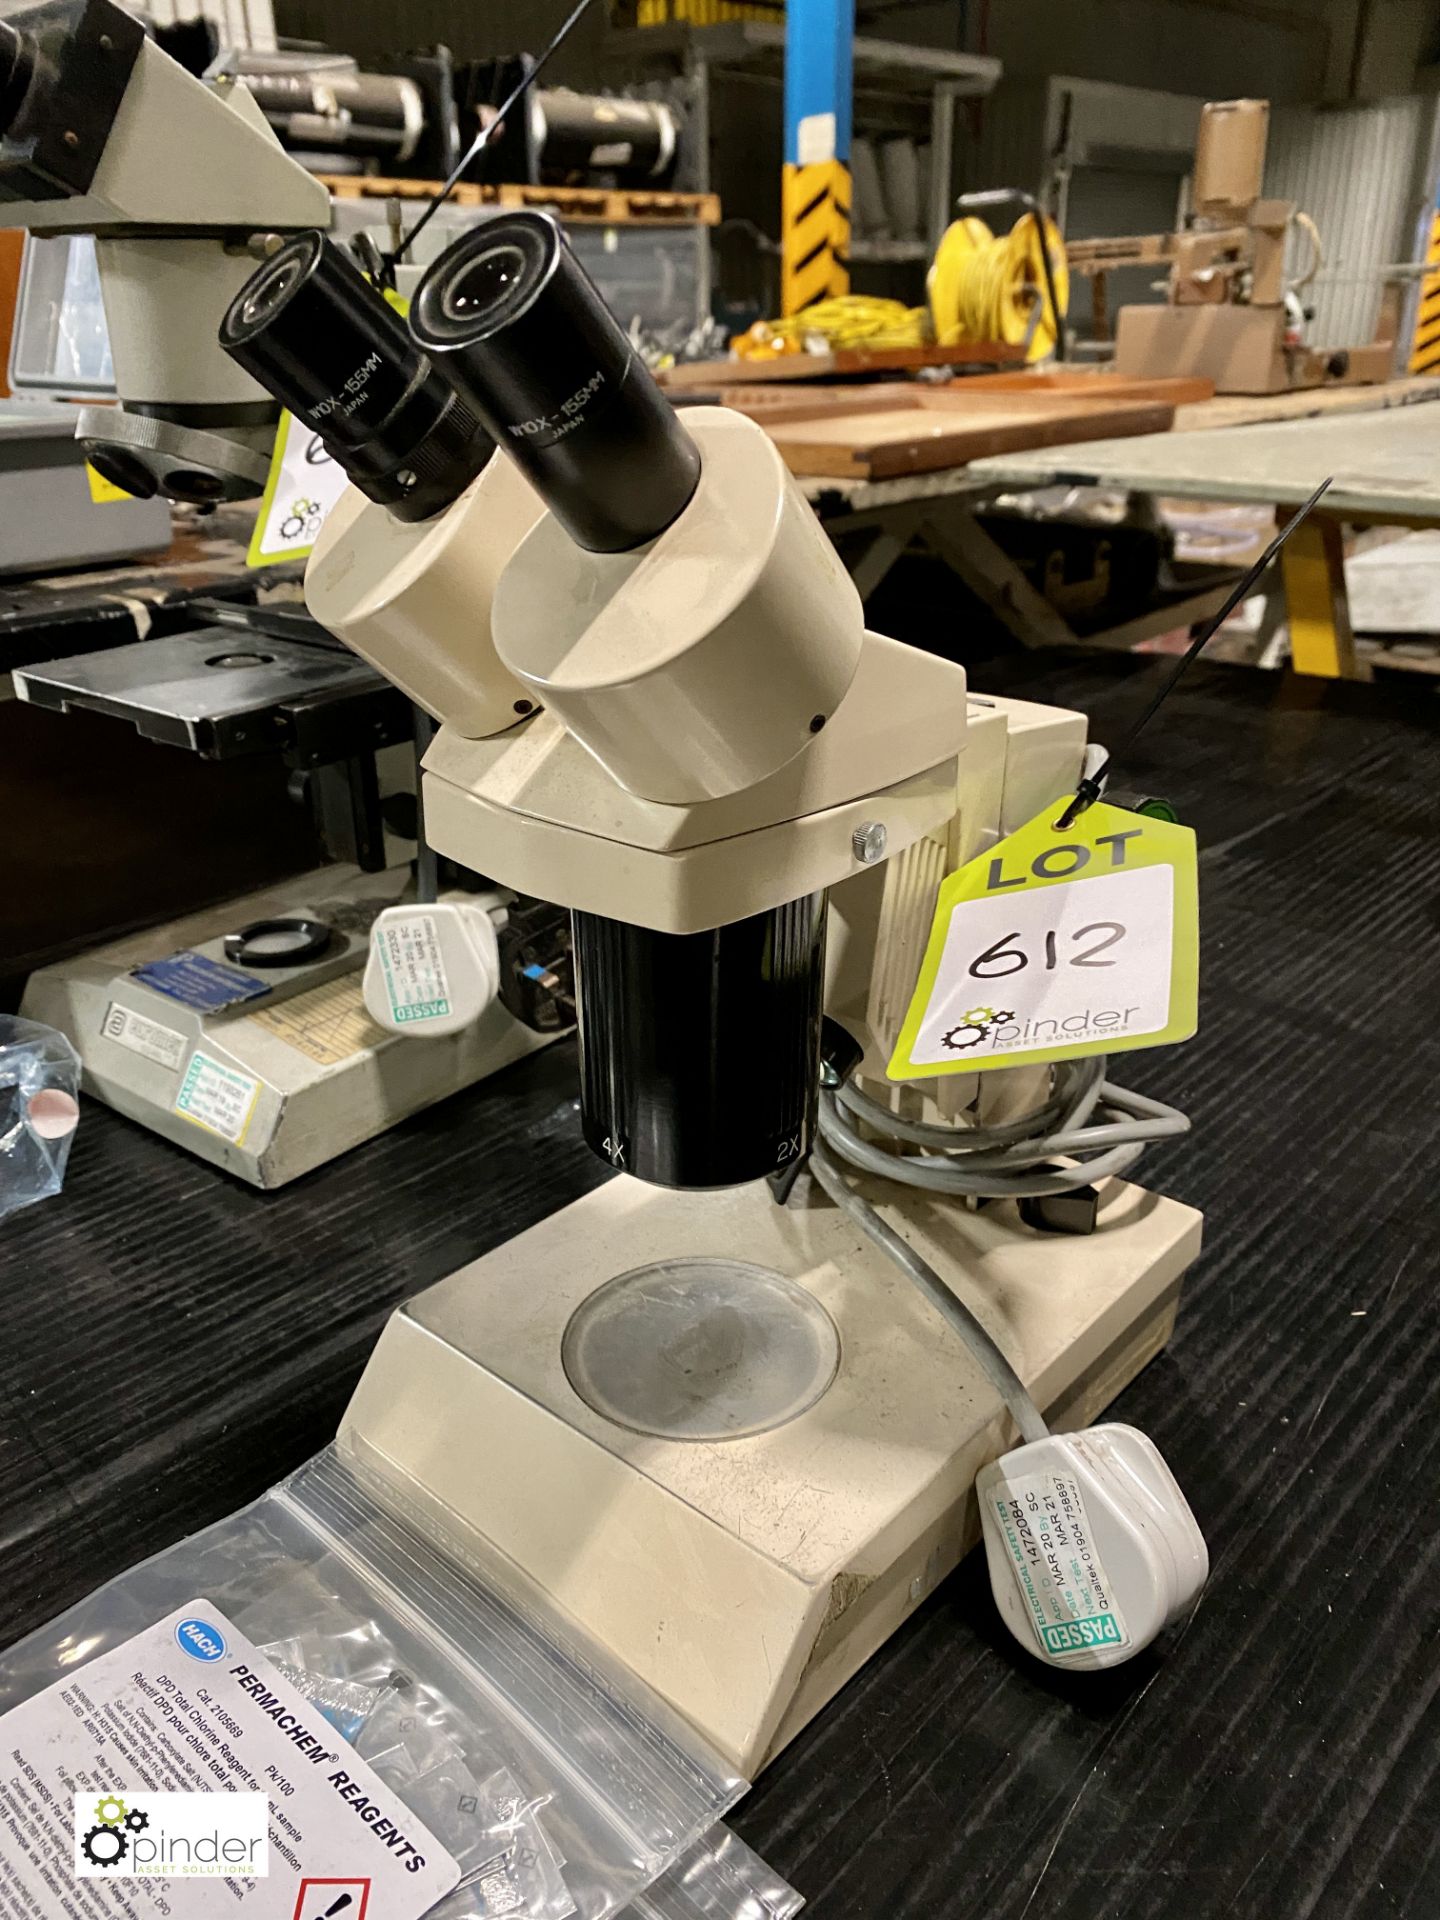 Swift Stereo 80 Microscope (please note there is a